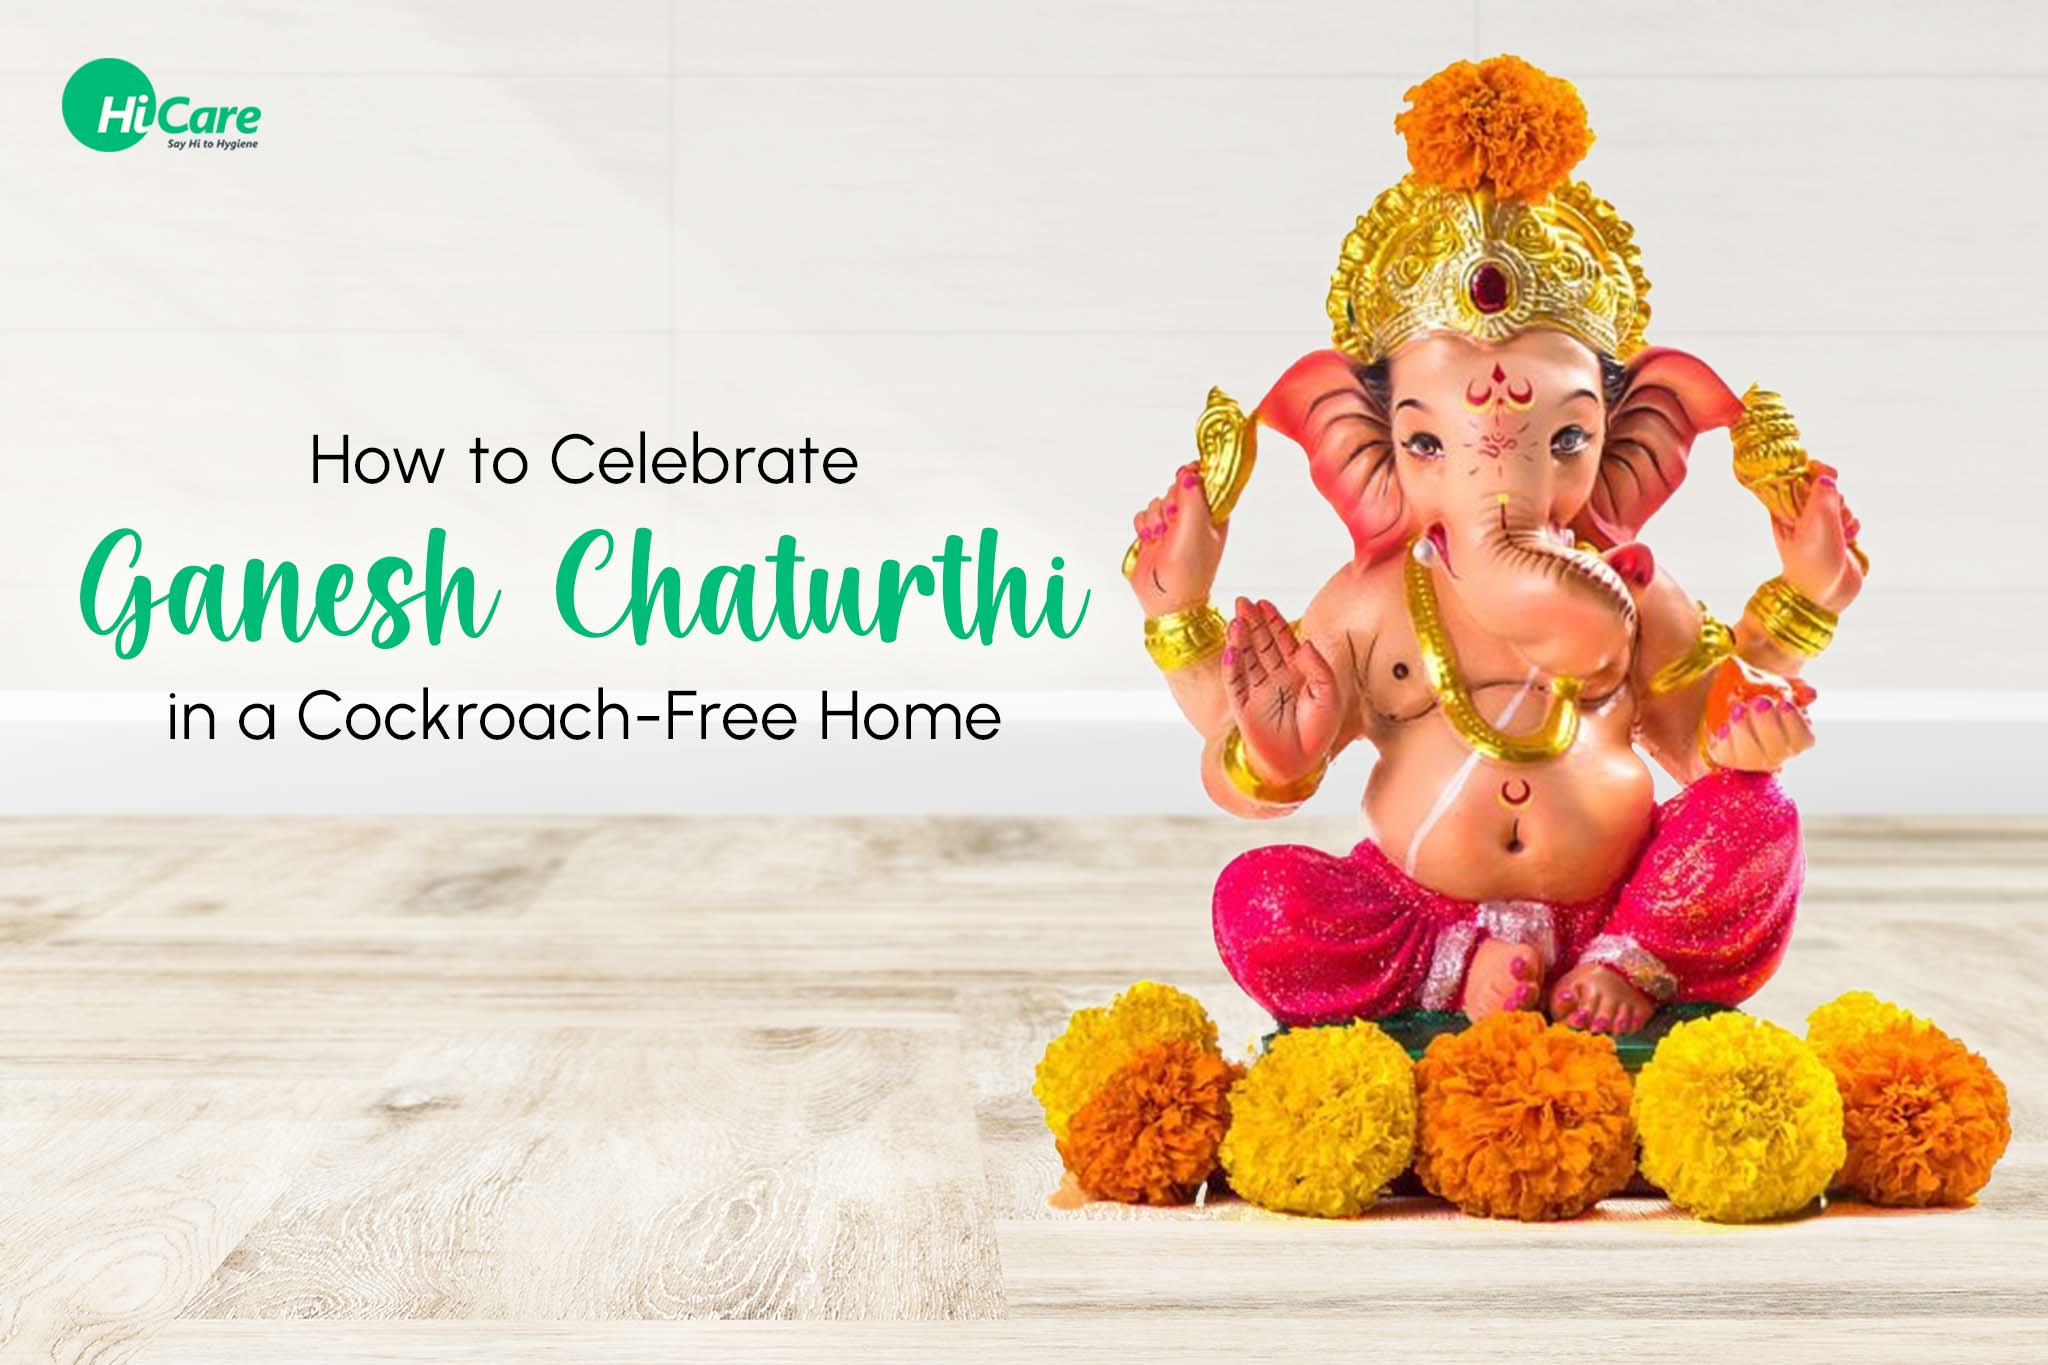 How to Celebrate Ganesh Chaturthi in a Cockroach-Free Home